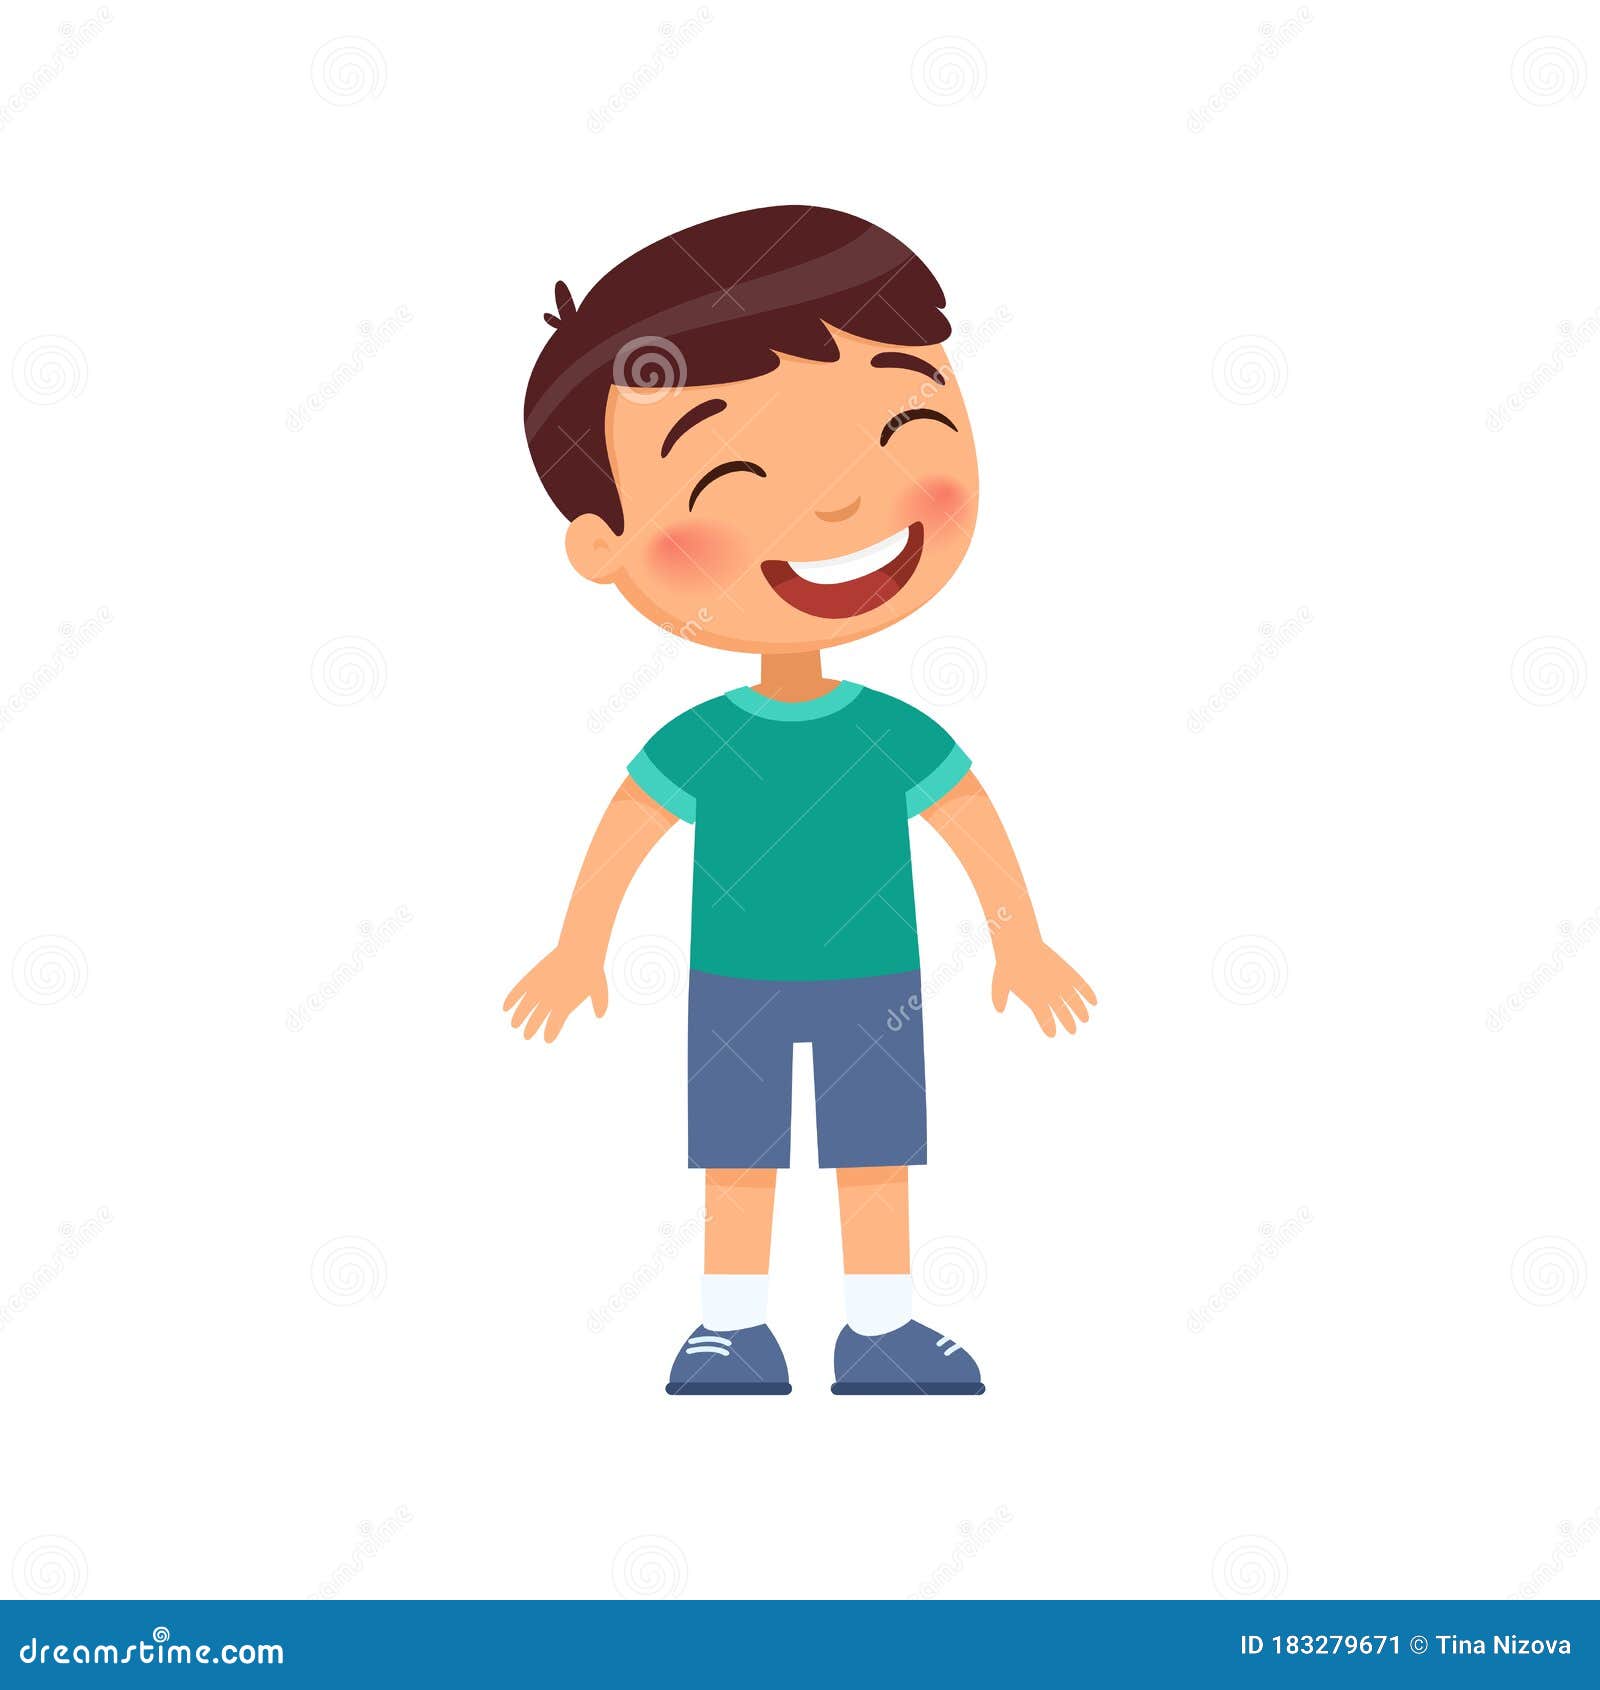 Laughing Little Boy Flat Vector Illustration. Cheerful Child with a Smile  on Face Standing Alone Cartoon Character Stock Vector - Illustration of  element, graphic: 183279671